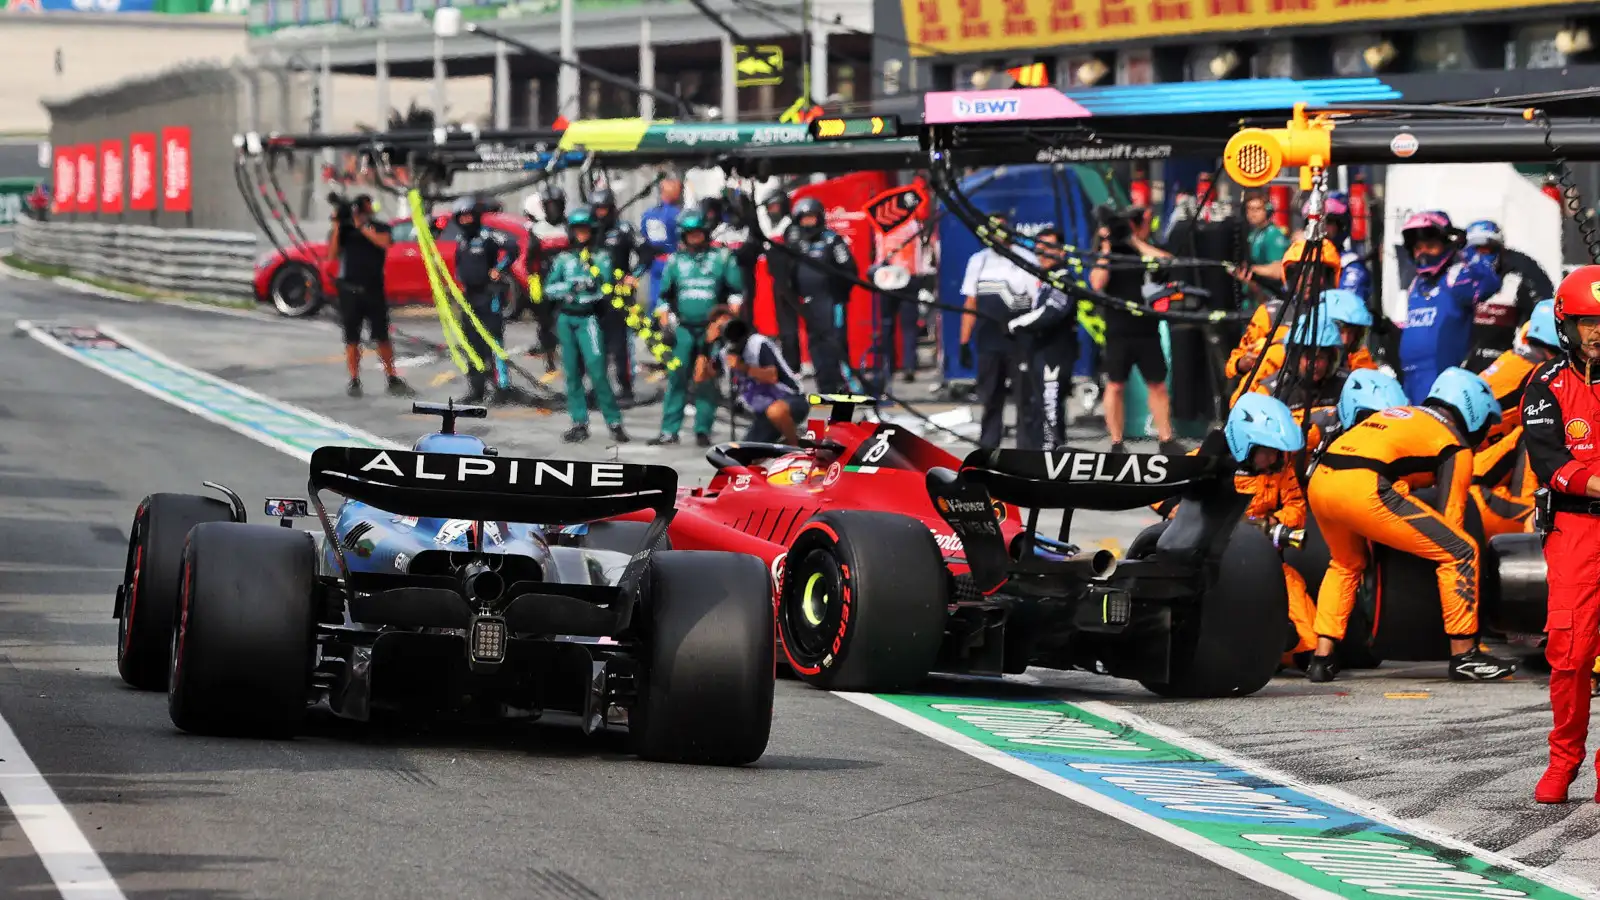 Carlos Sainz and Fernando Alonso also collide in the pit lane. Netherlands September 2022